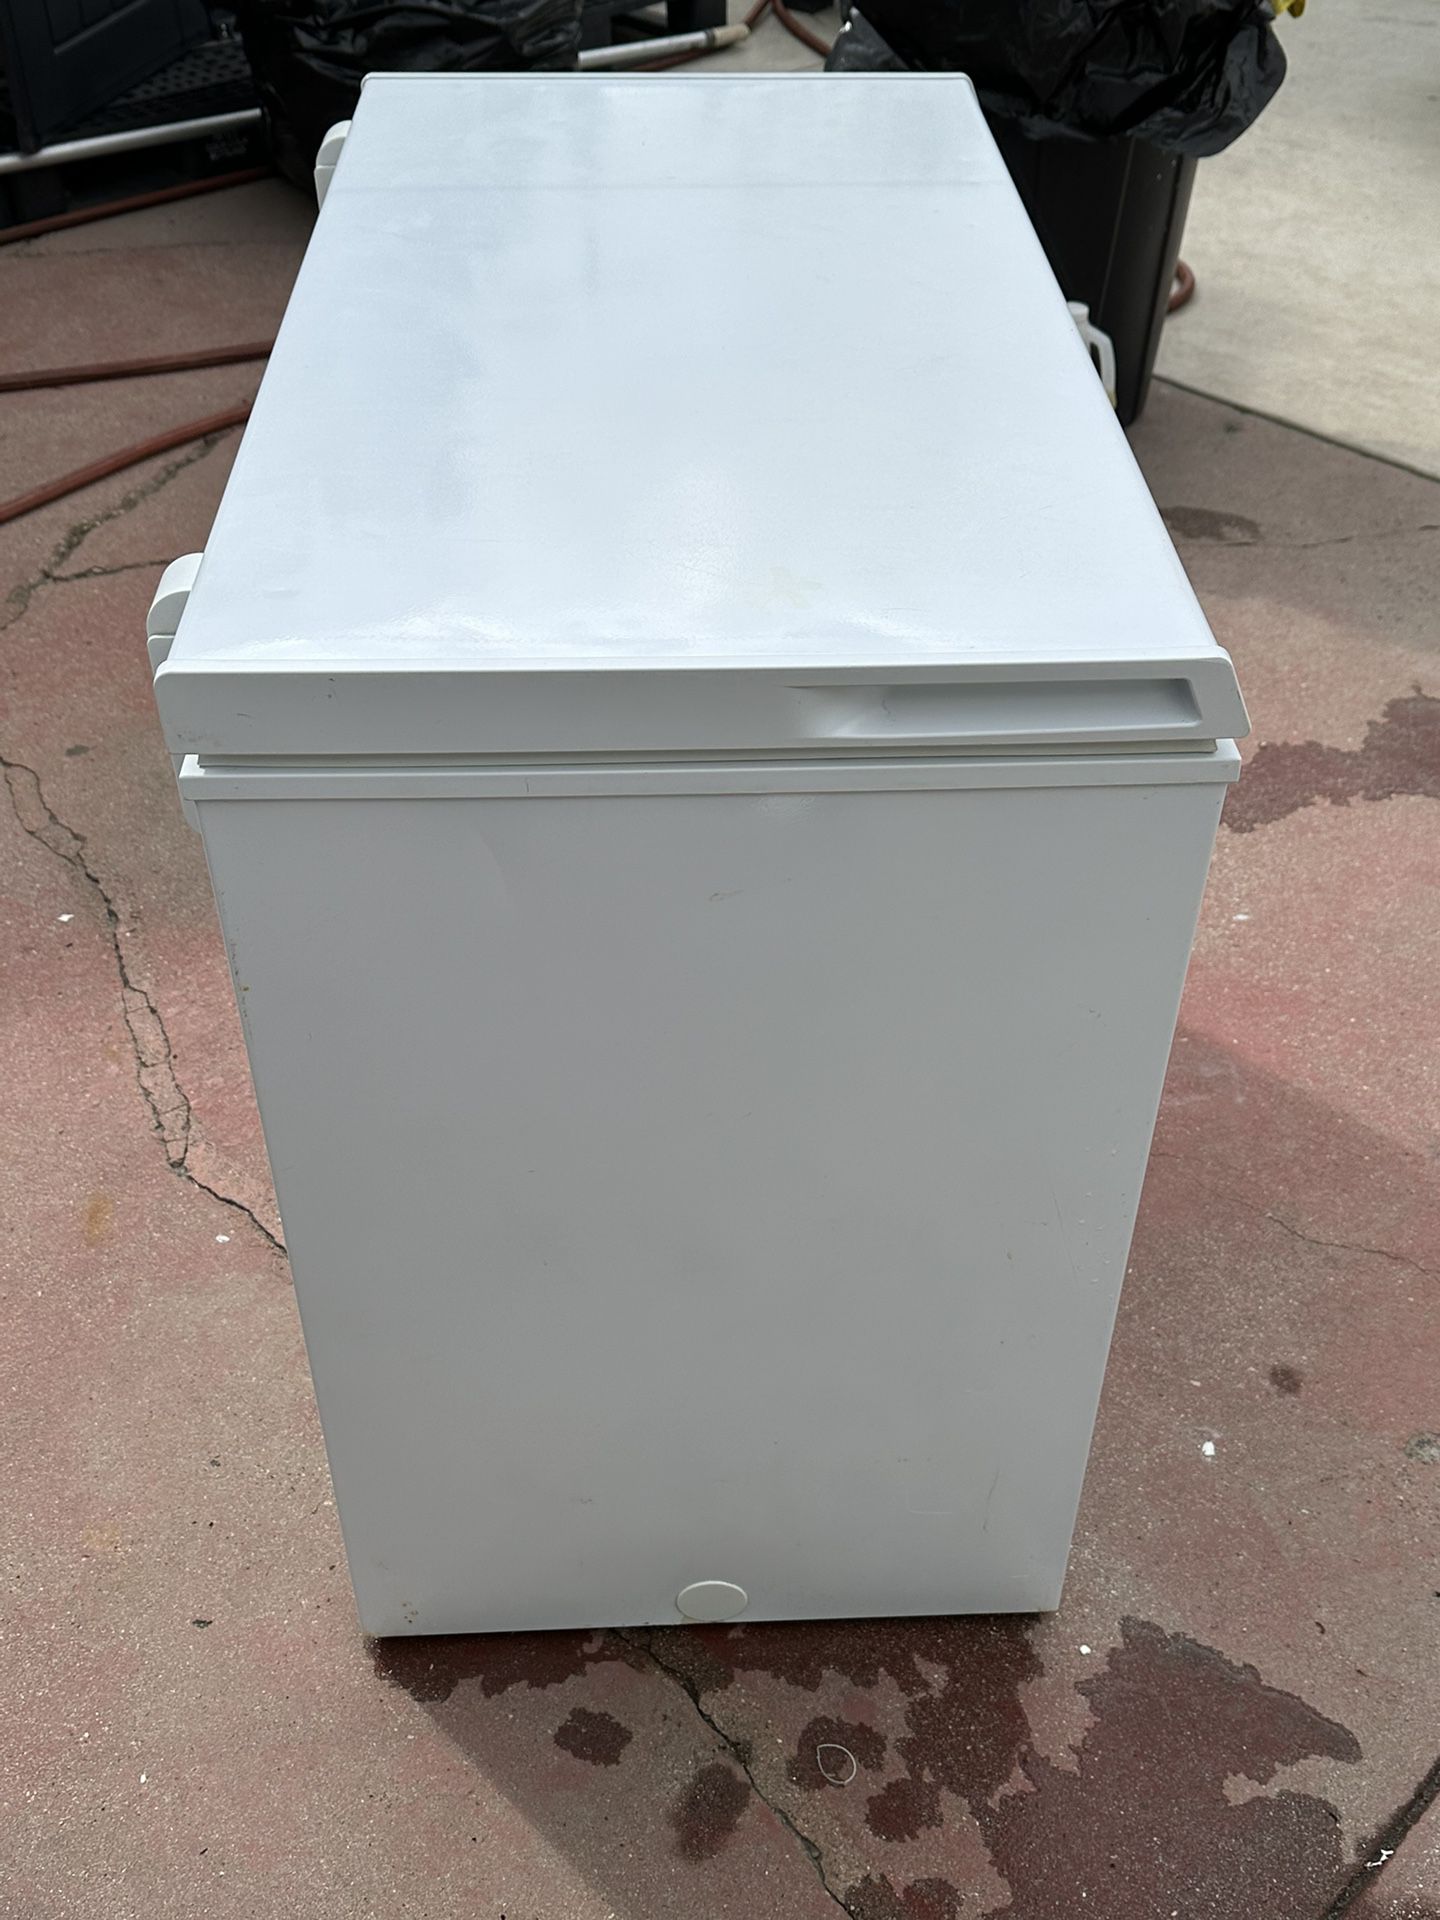 Criterion 7.0 - 7.2 cu. ft. White Manual Defrost Chest Freezer for Sale in  Lynwood, CA - OfferUp